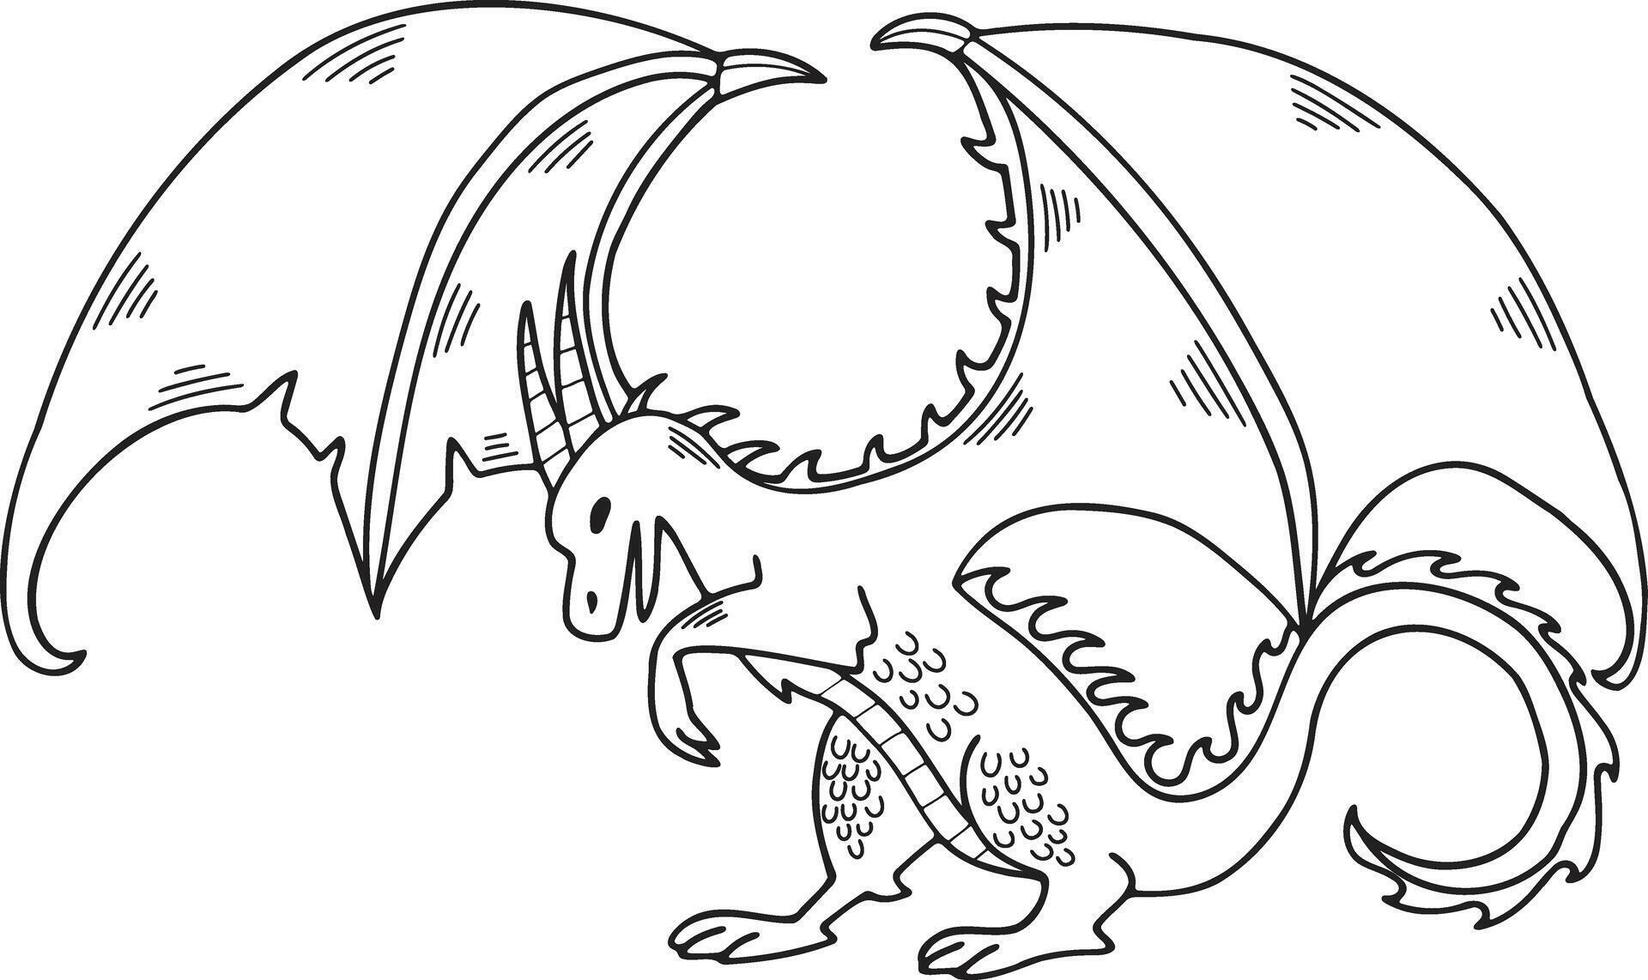 Hand Drawn dragon character in flat style vector